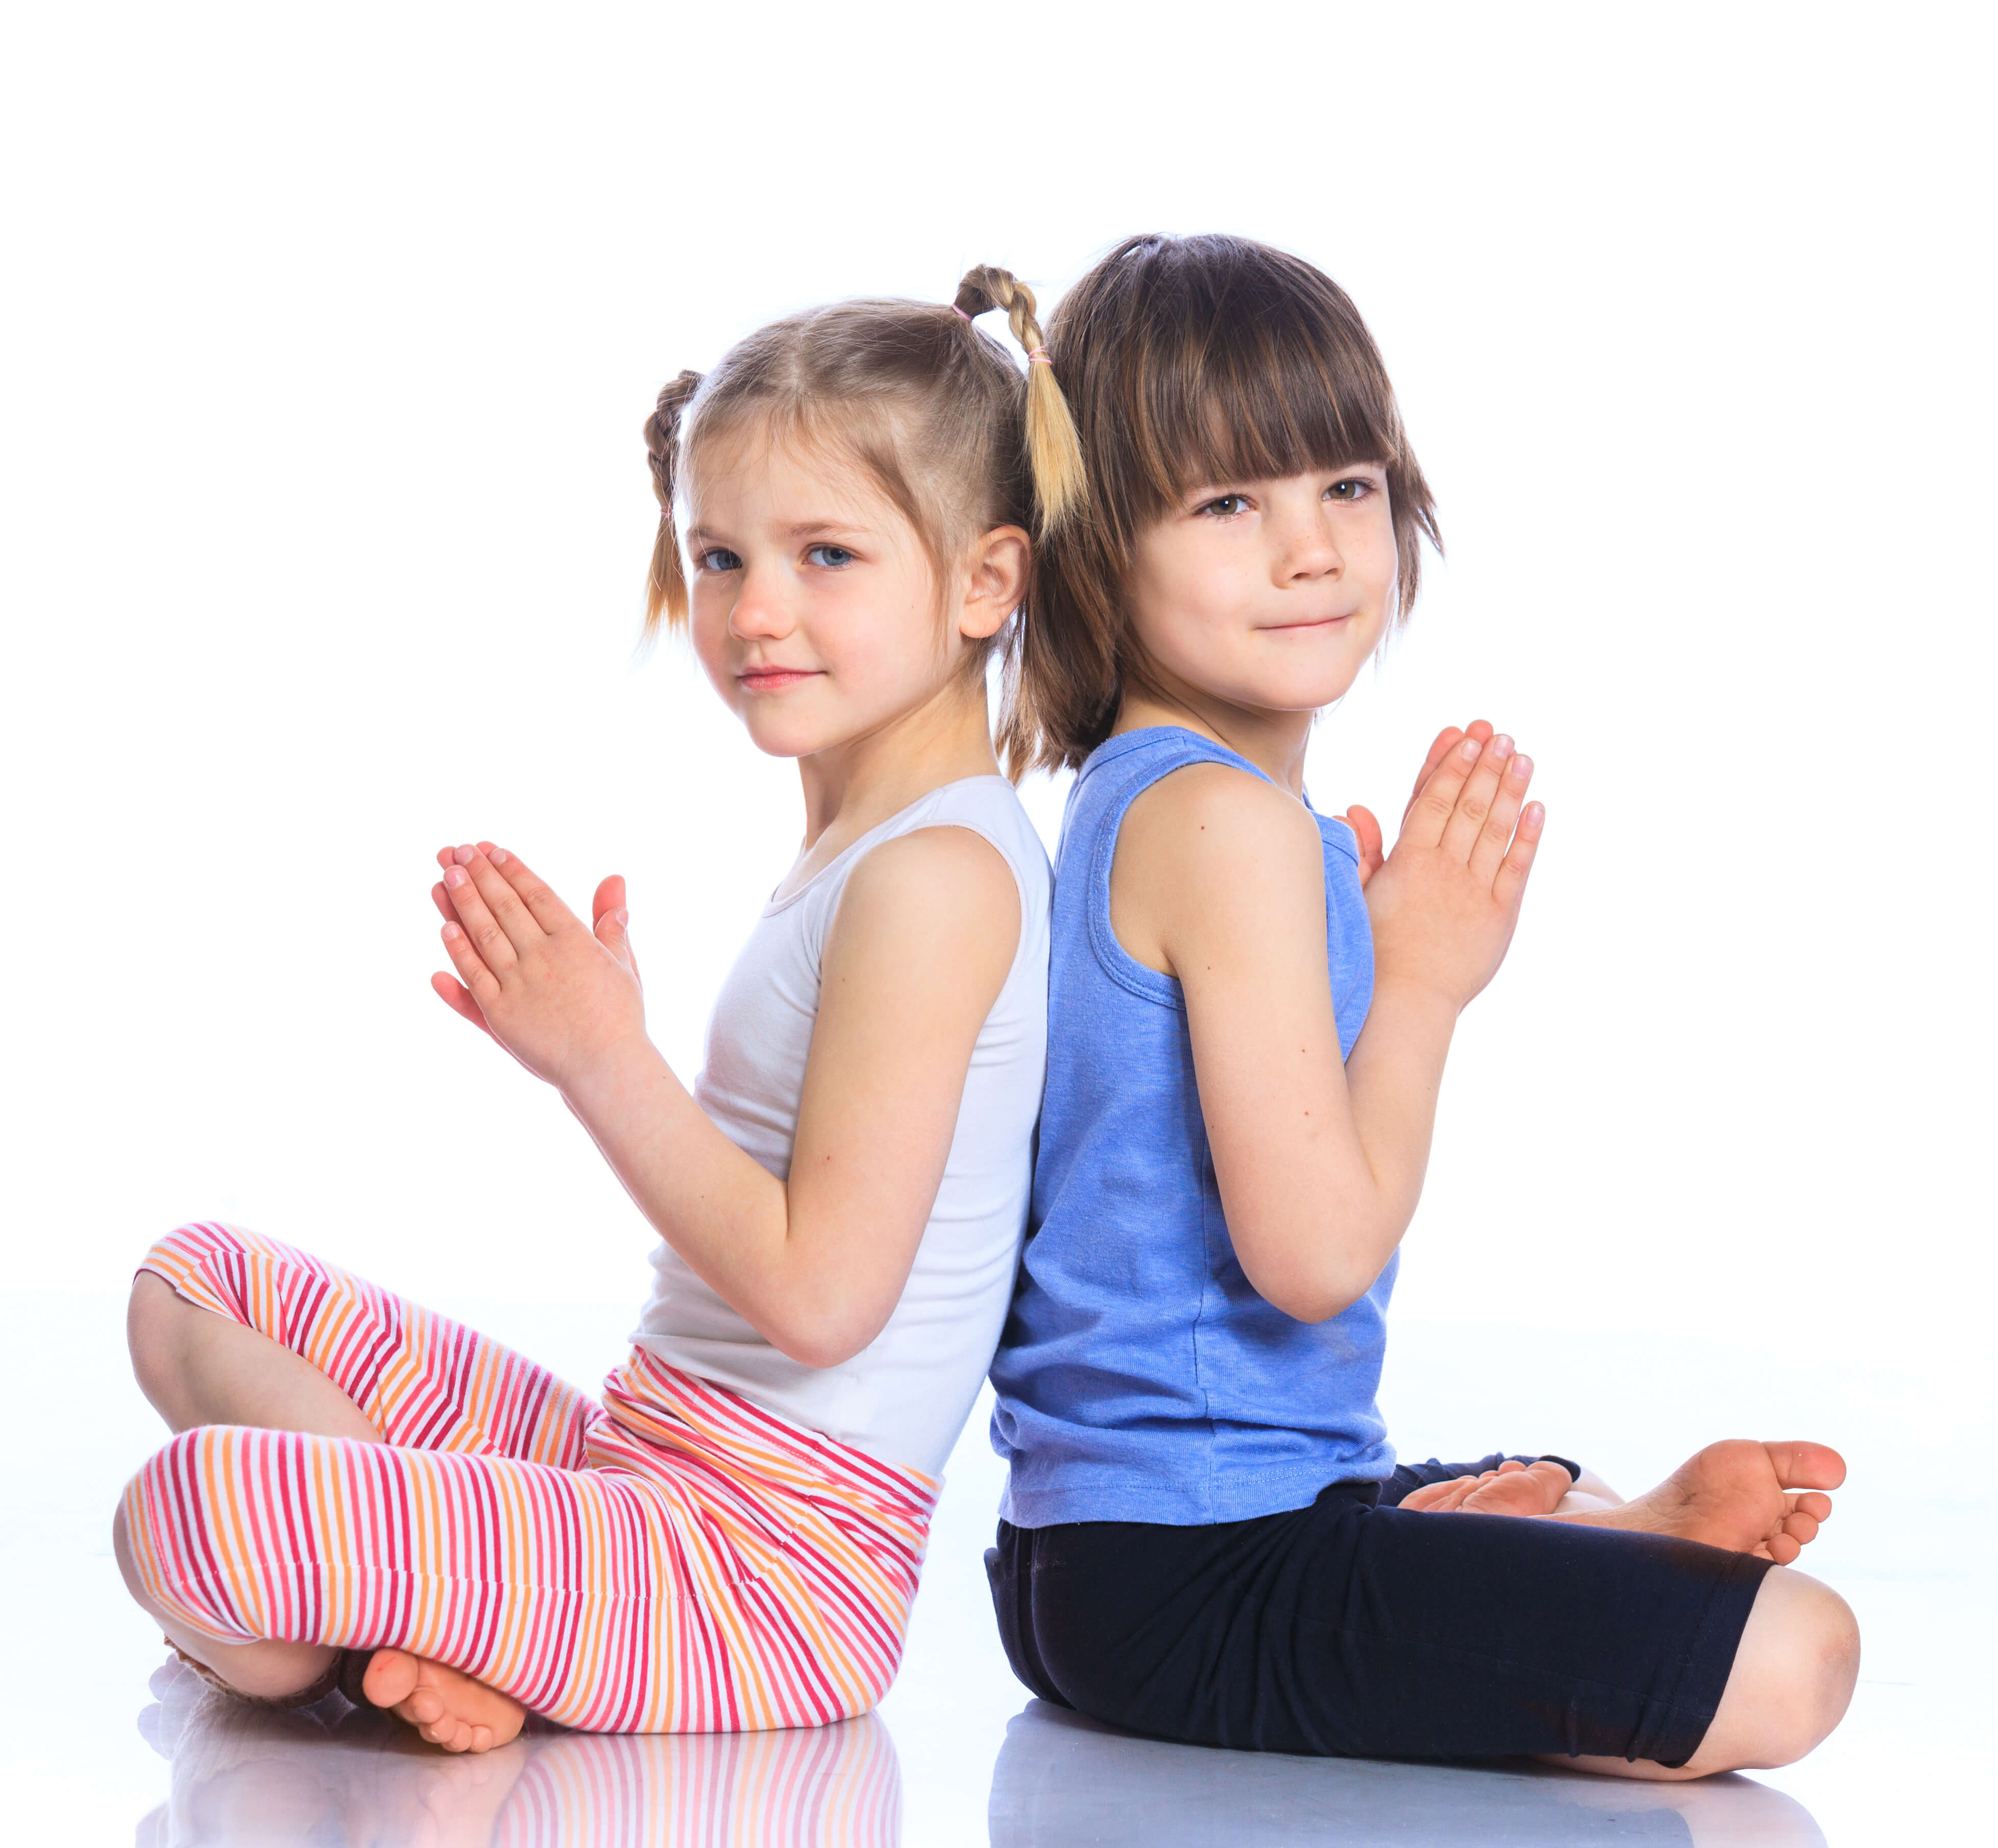 By introducing yoga for anxiety to kids, you will be giving them lifelong skills to become calm and focused, and better manage their anxiety.